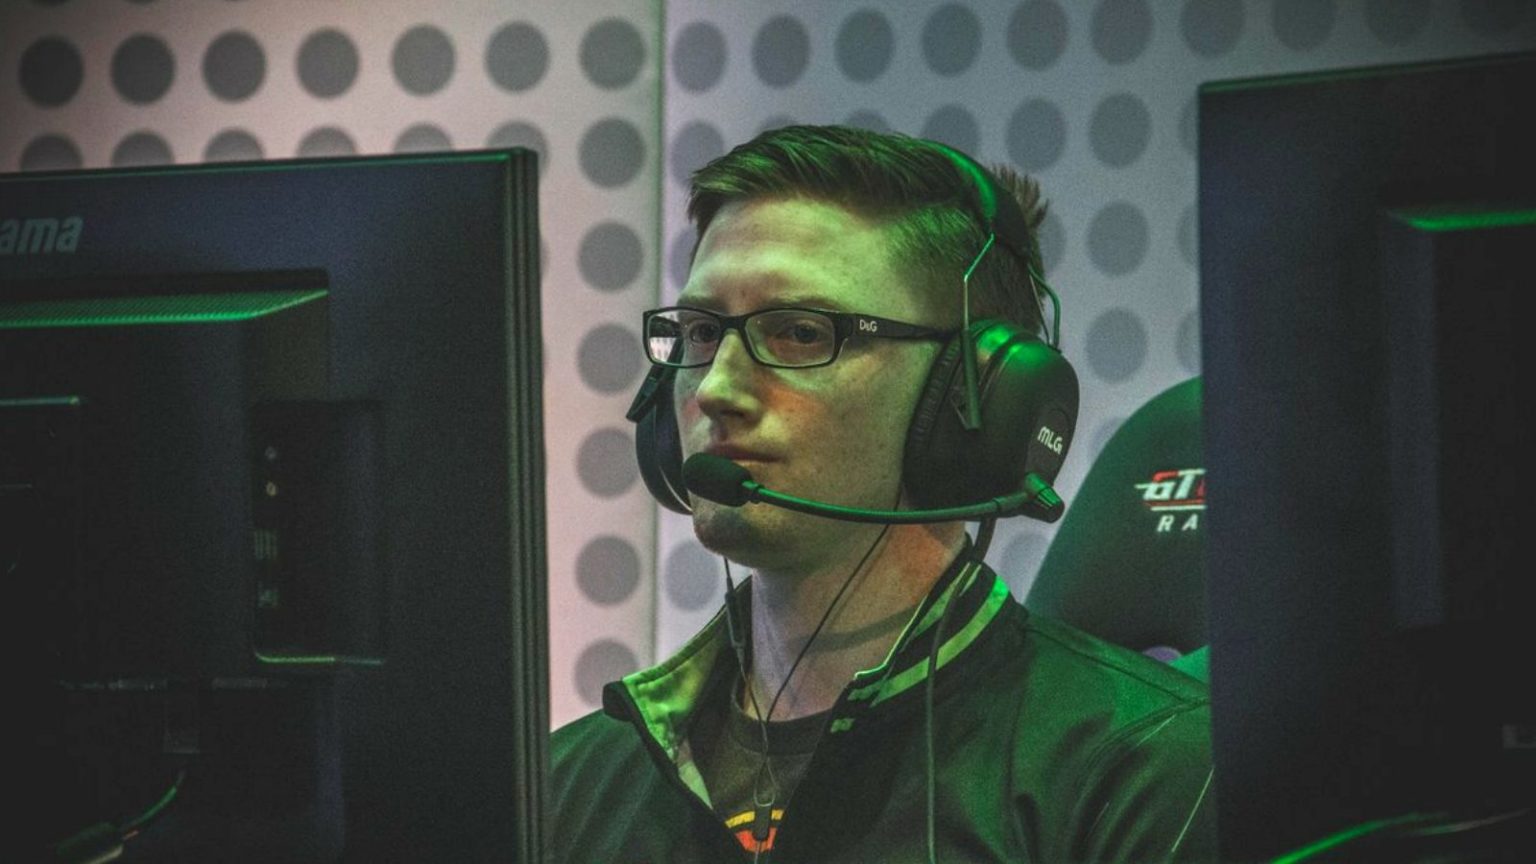 Players like Seth “Scump” Abner and James “Clayster” Eubanks struggle with mental health as players go through long and tedious seasons.